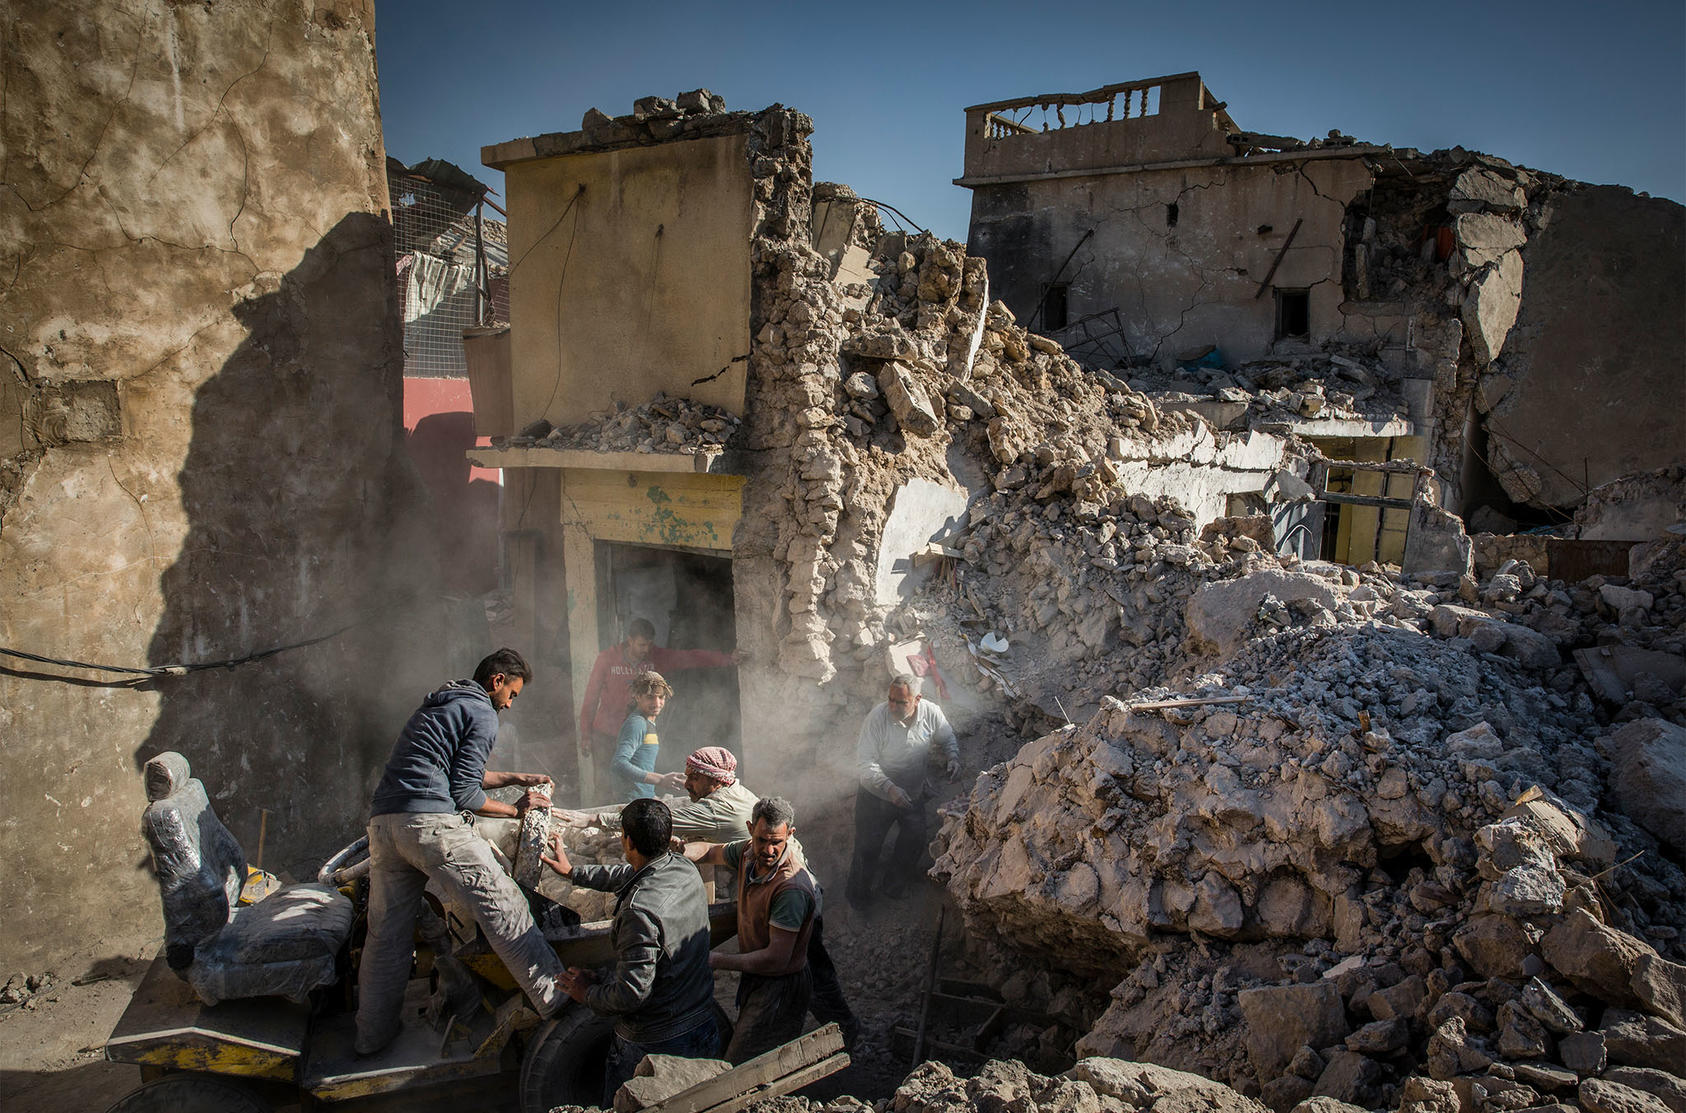 A family begins the arduous task of rebuilding its destroyed home in the heavily damaged Old City in west Mosul, Iraq, Dec. 4, 2017. (Ivor Prickett/The New York Times)